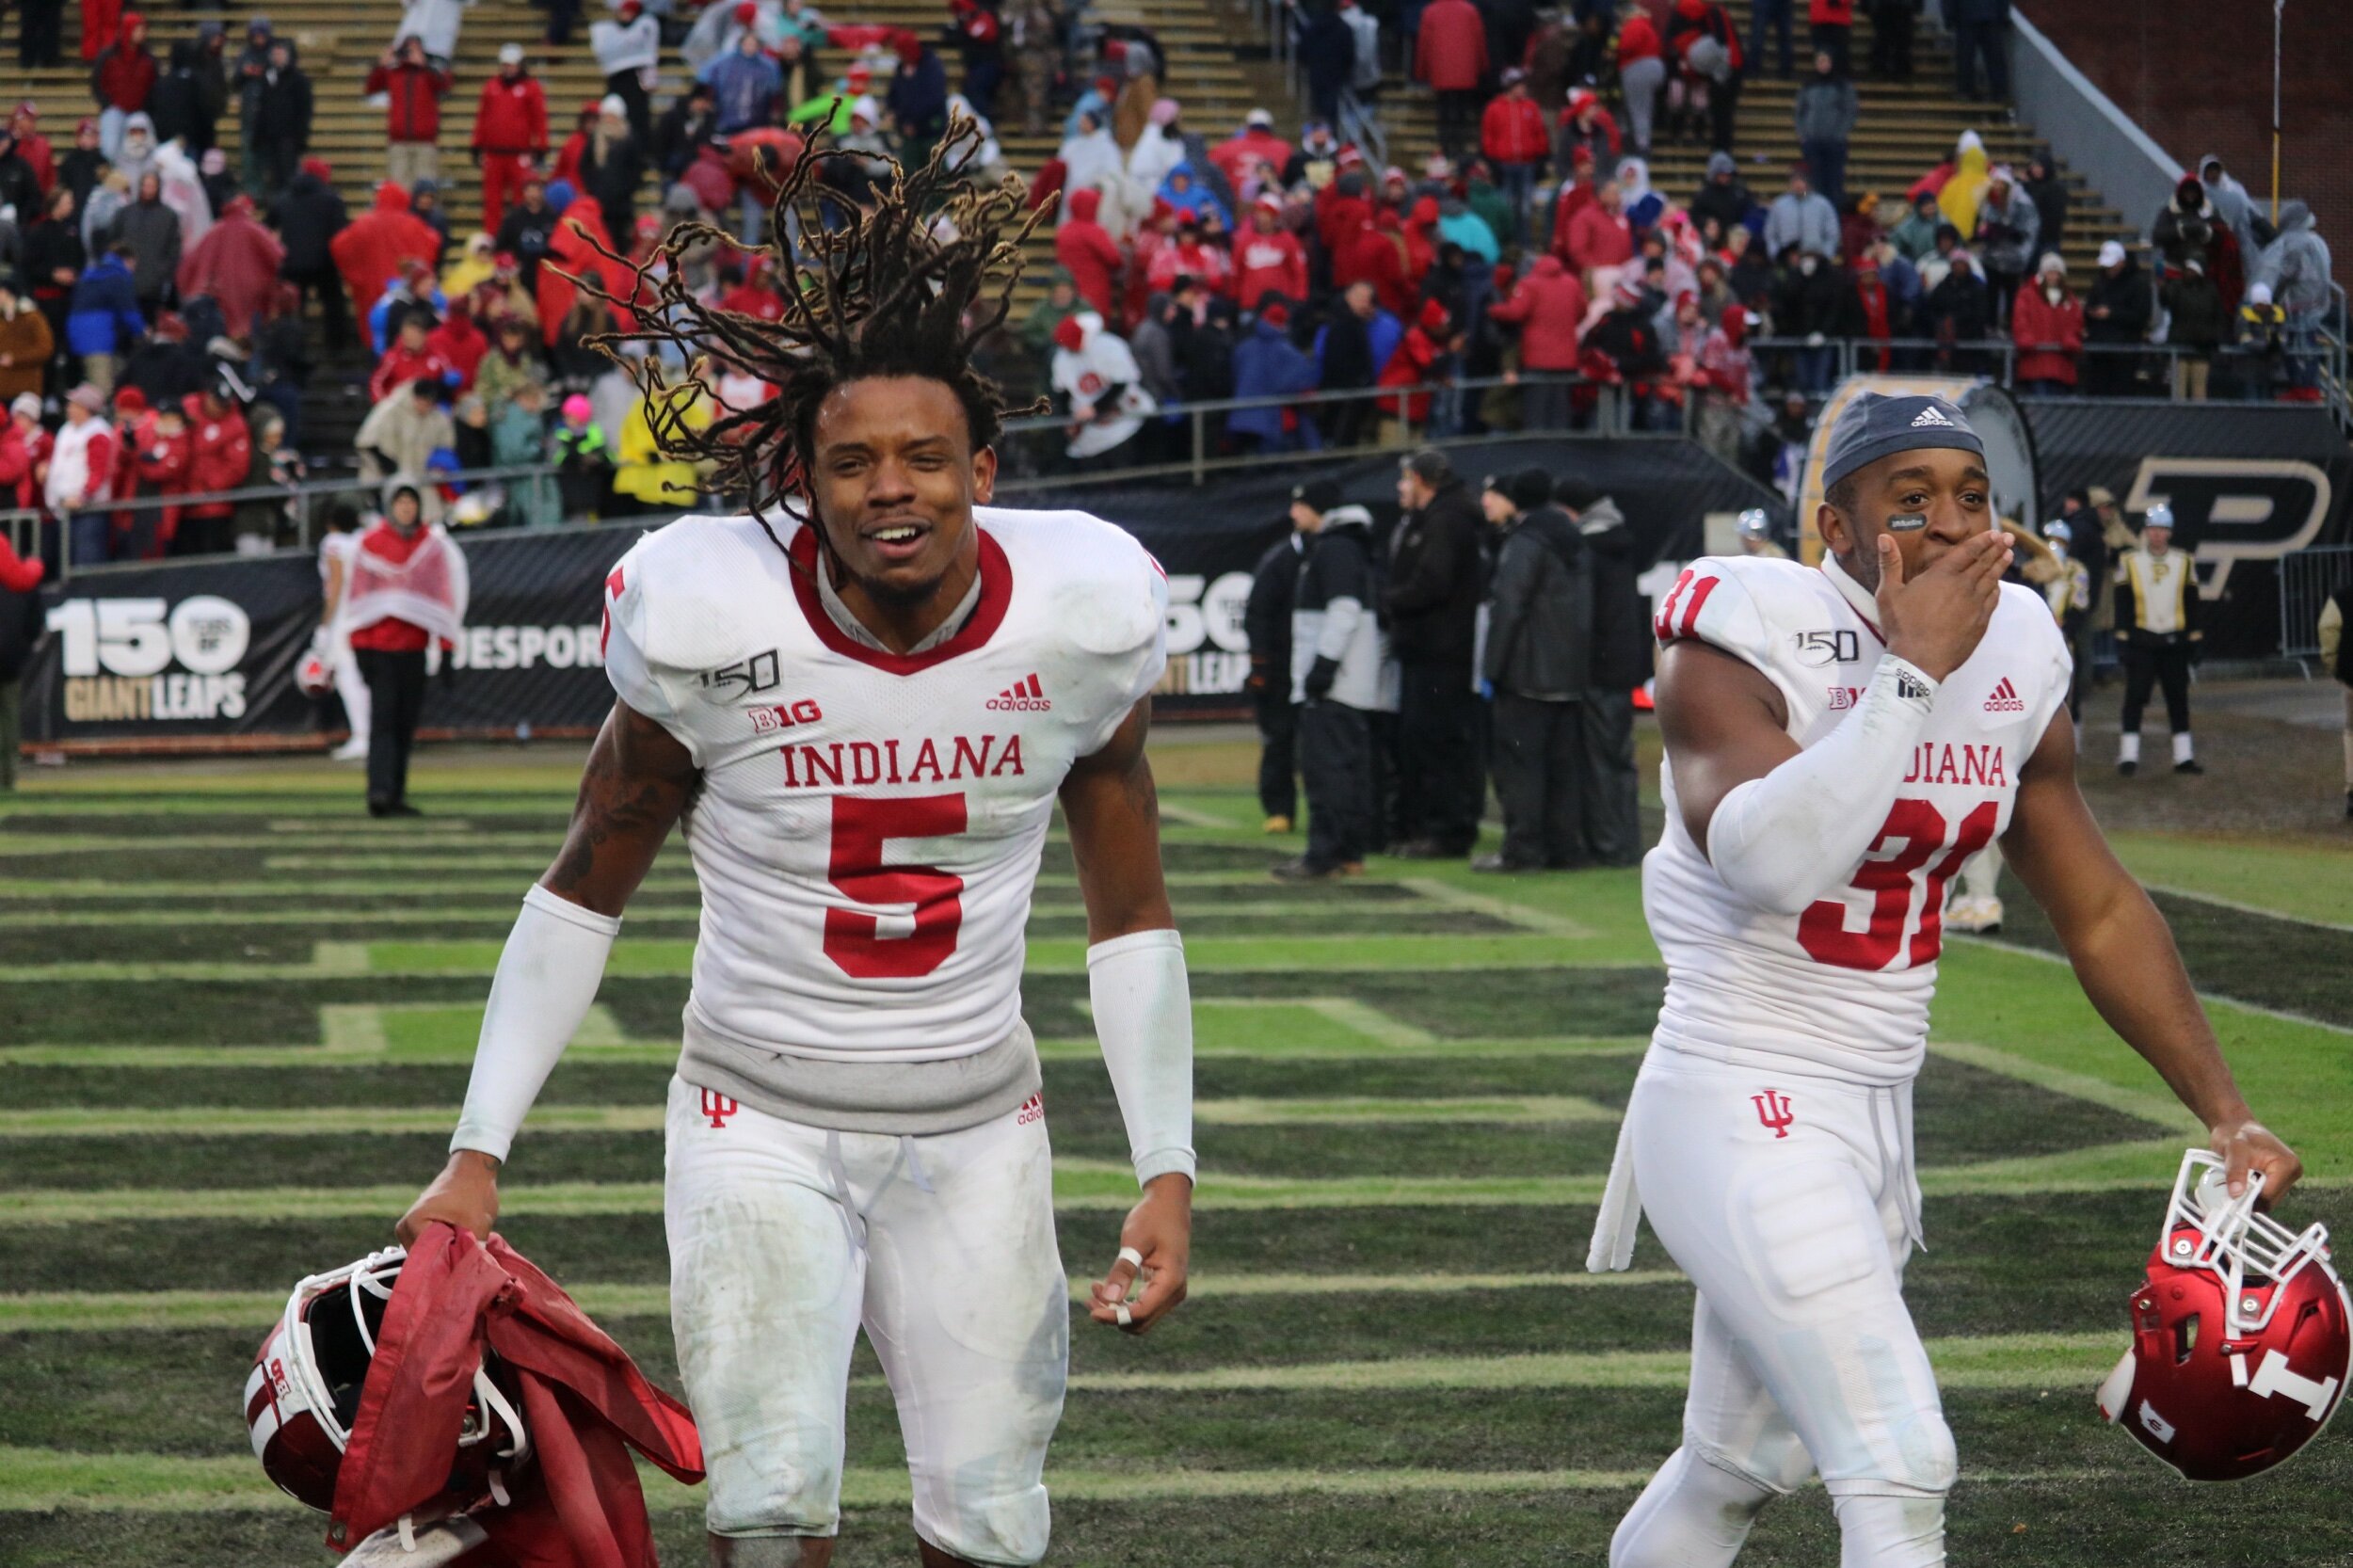  Redshirt sophomore DB Juwan Burgess celebrates Indiana’s 44-41 double overtime victory of the Old Oaken Bucket. Burgess tallied three tackles in West Lafayette, and ended his sophomore campaign with 29 tackles, 22 solo and 7 assists, and 2 tackles f